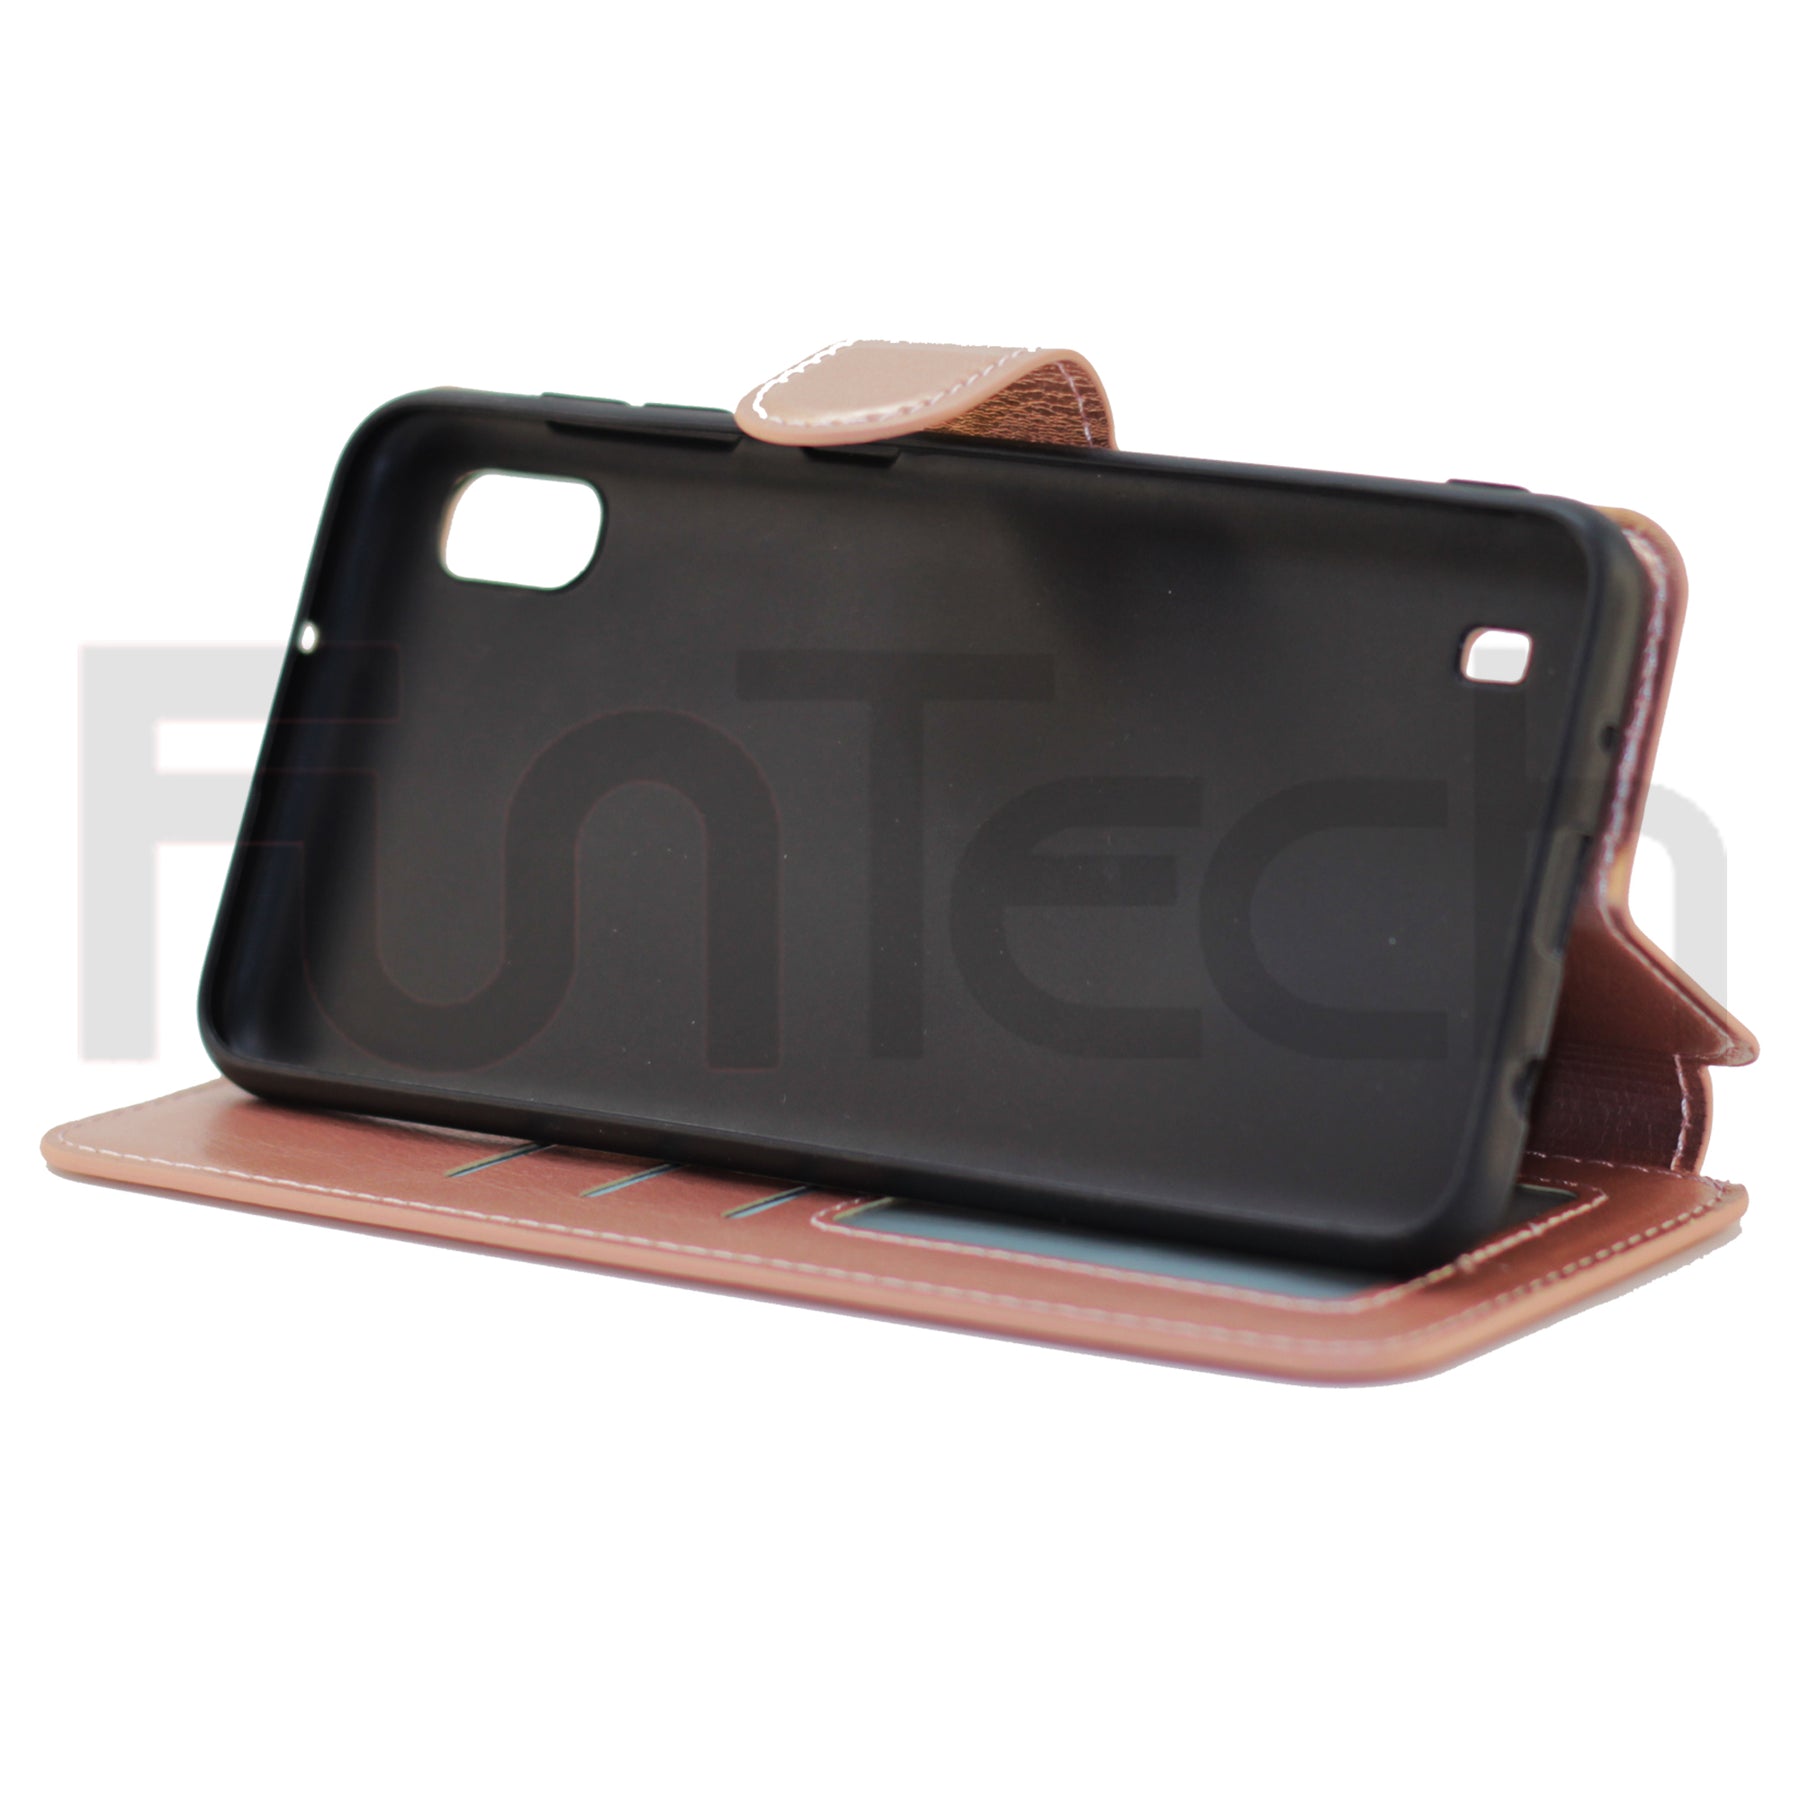 Samsung A10, Leather Wallet Case, rose Gold.